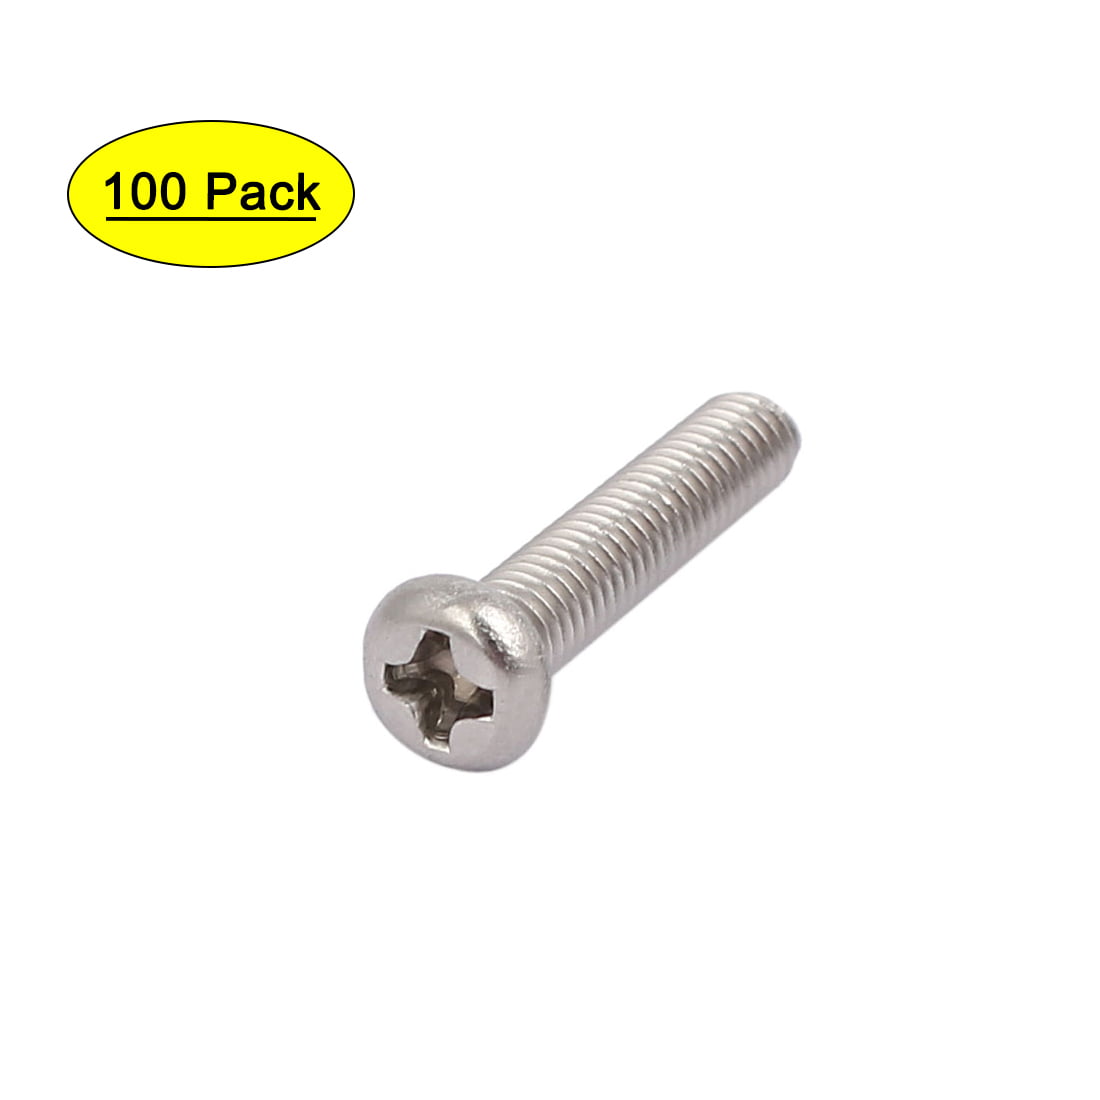 pan head slotted bolt bolts screw pack of 50 Machine screws with nuts M4 x 20 